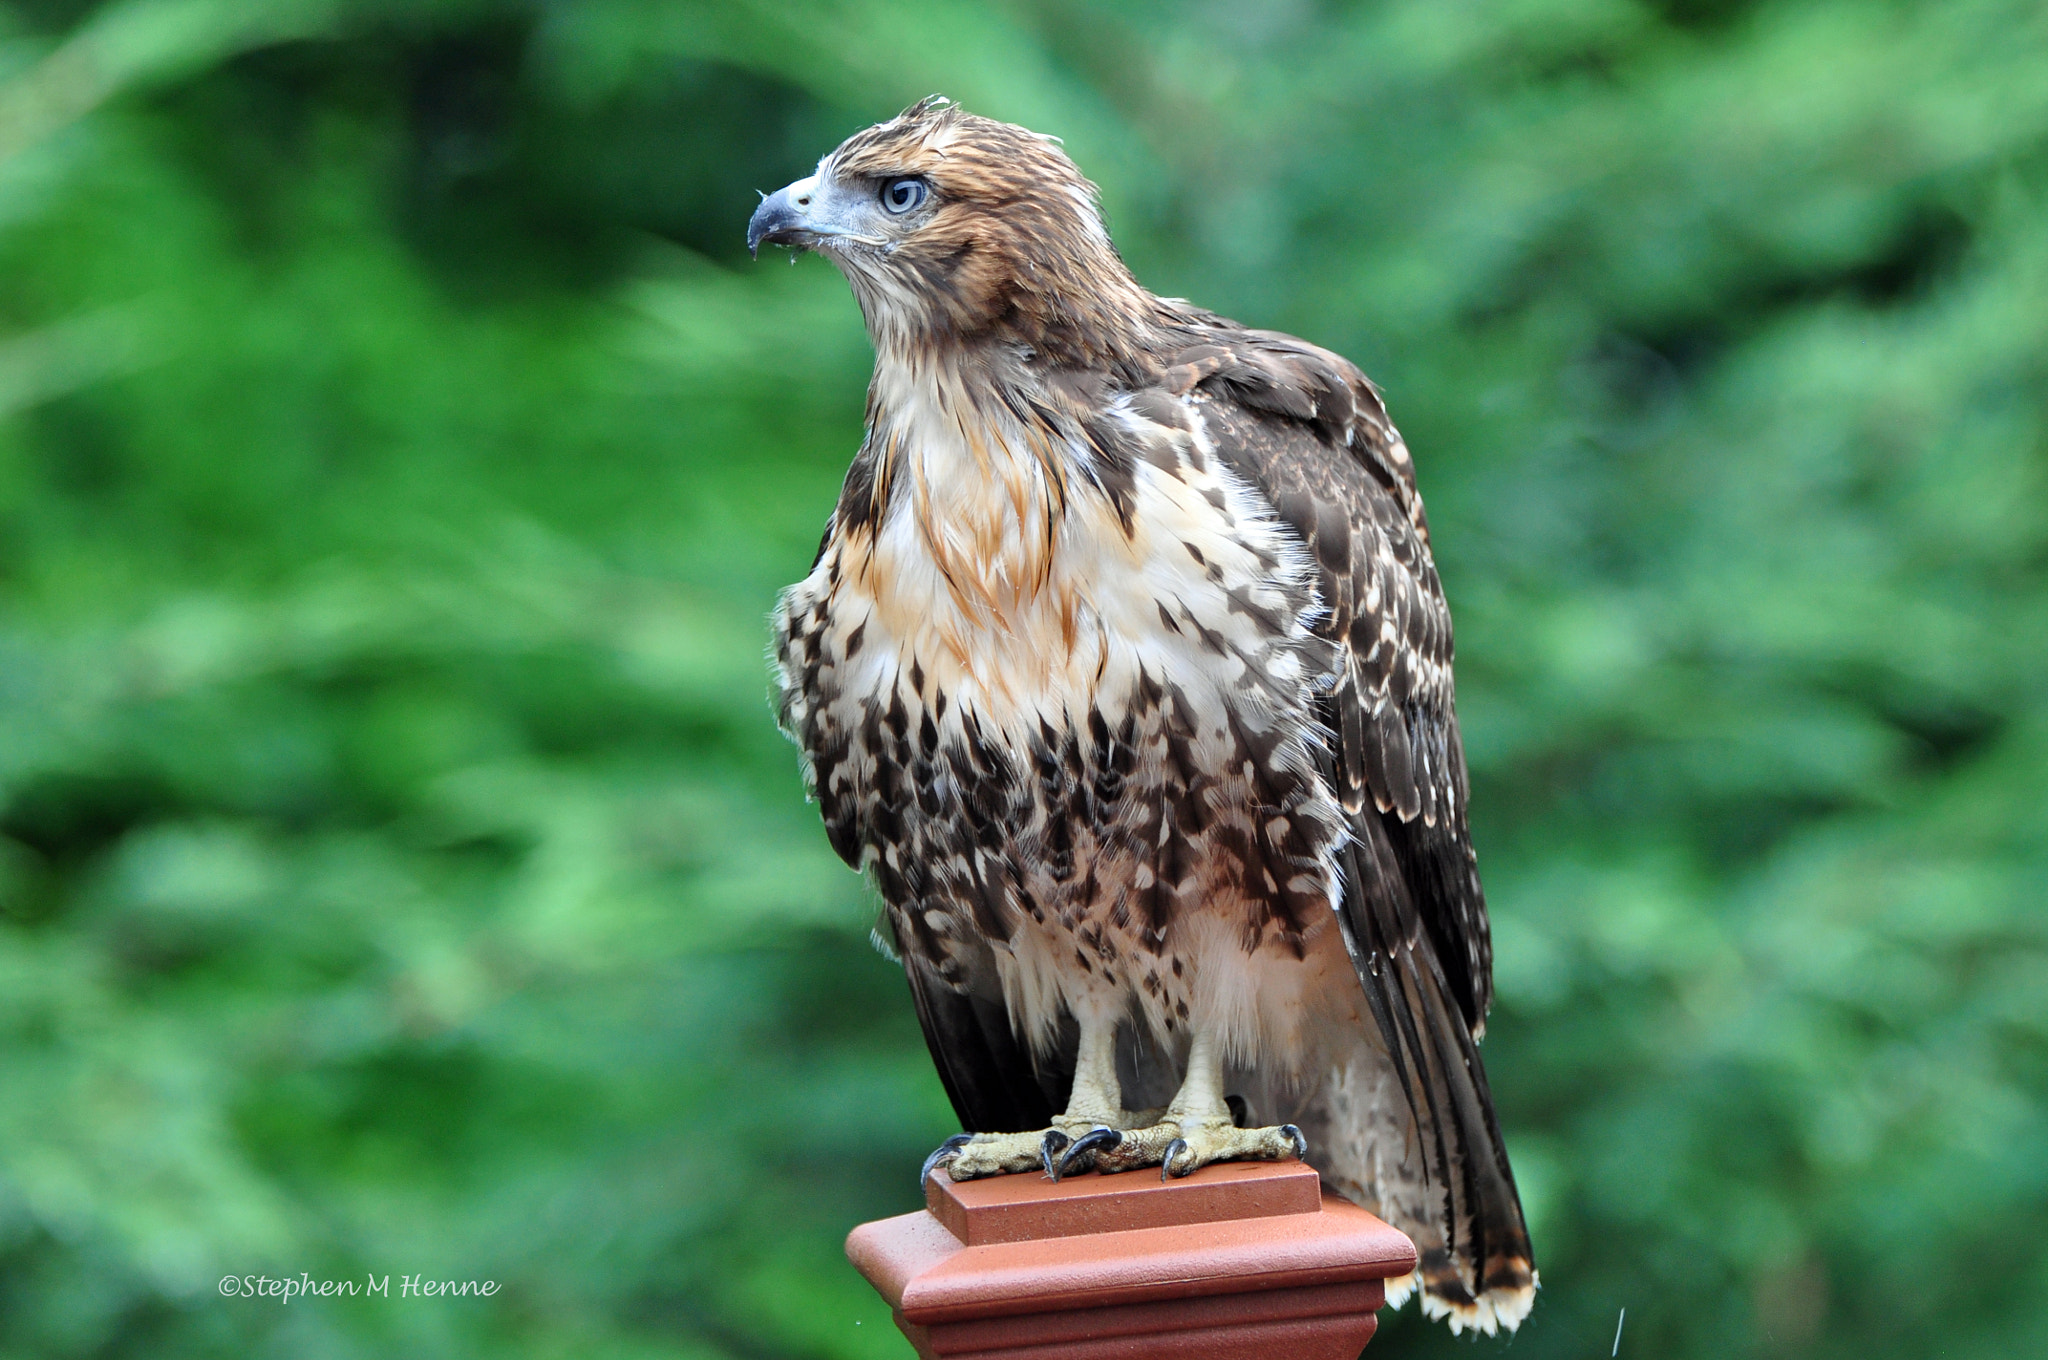 Nikon D90 + Nikon AF-S Nikkor 70-200mm F2.8G ED VR II sample photo. Caught this red-tailed hawk out on my deck this morning photography